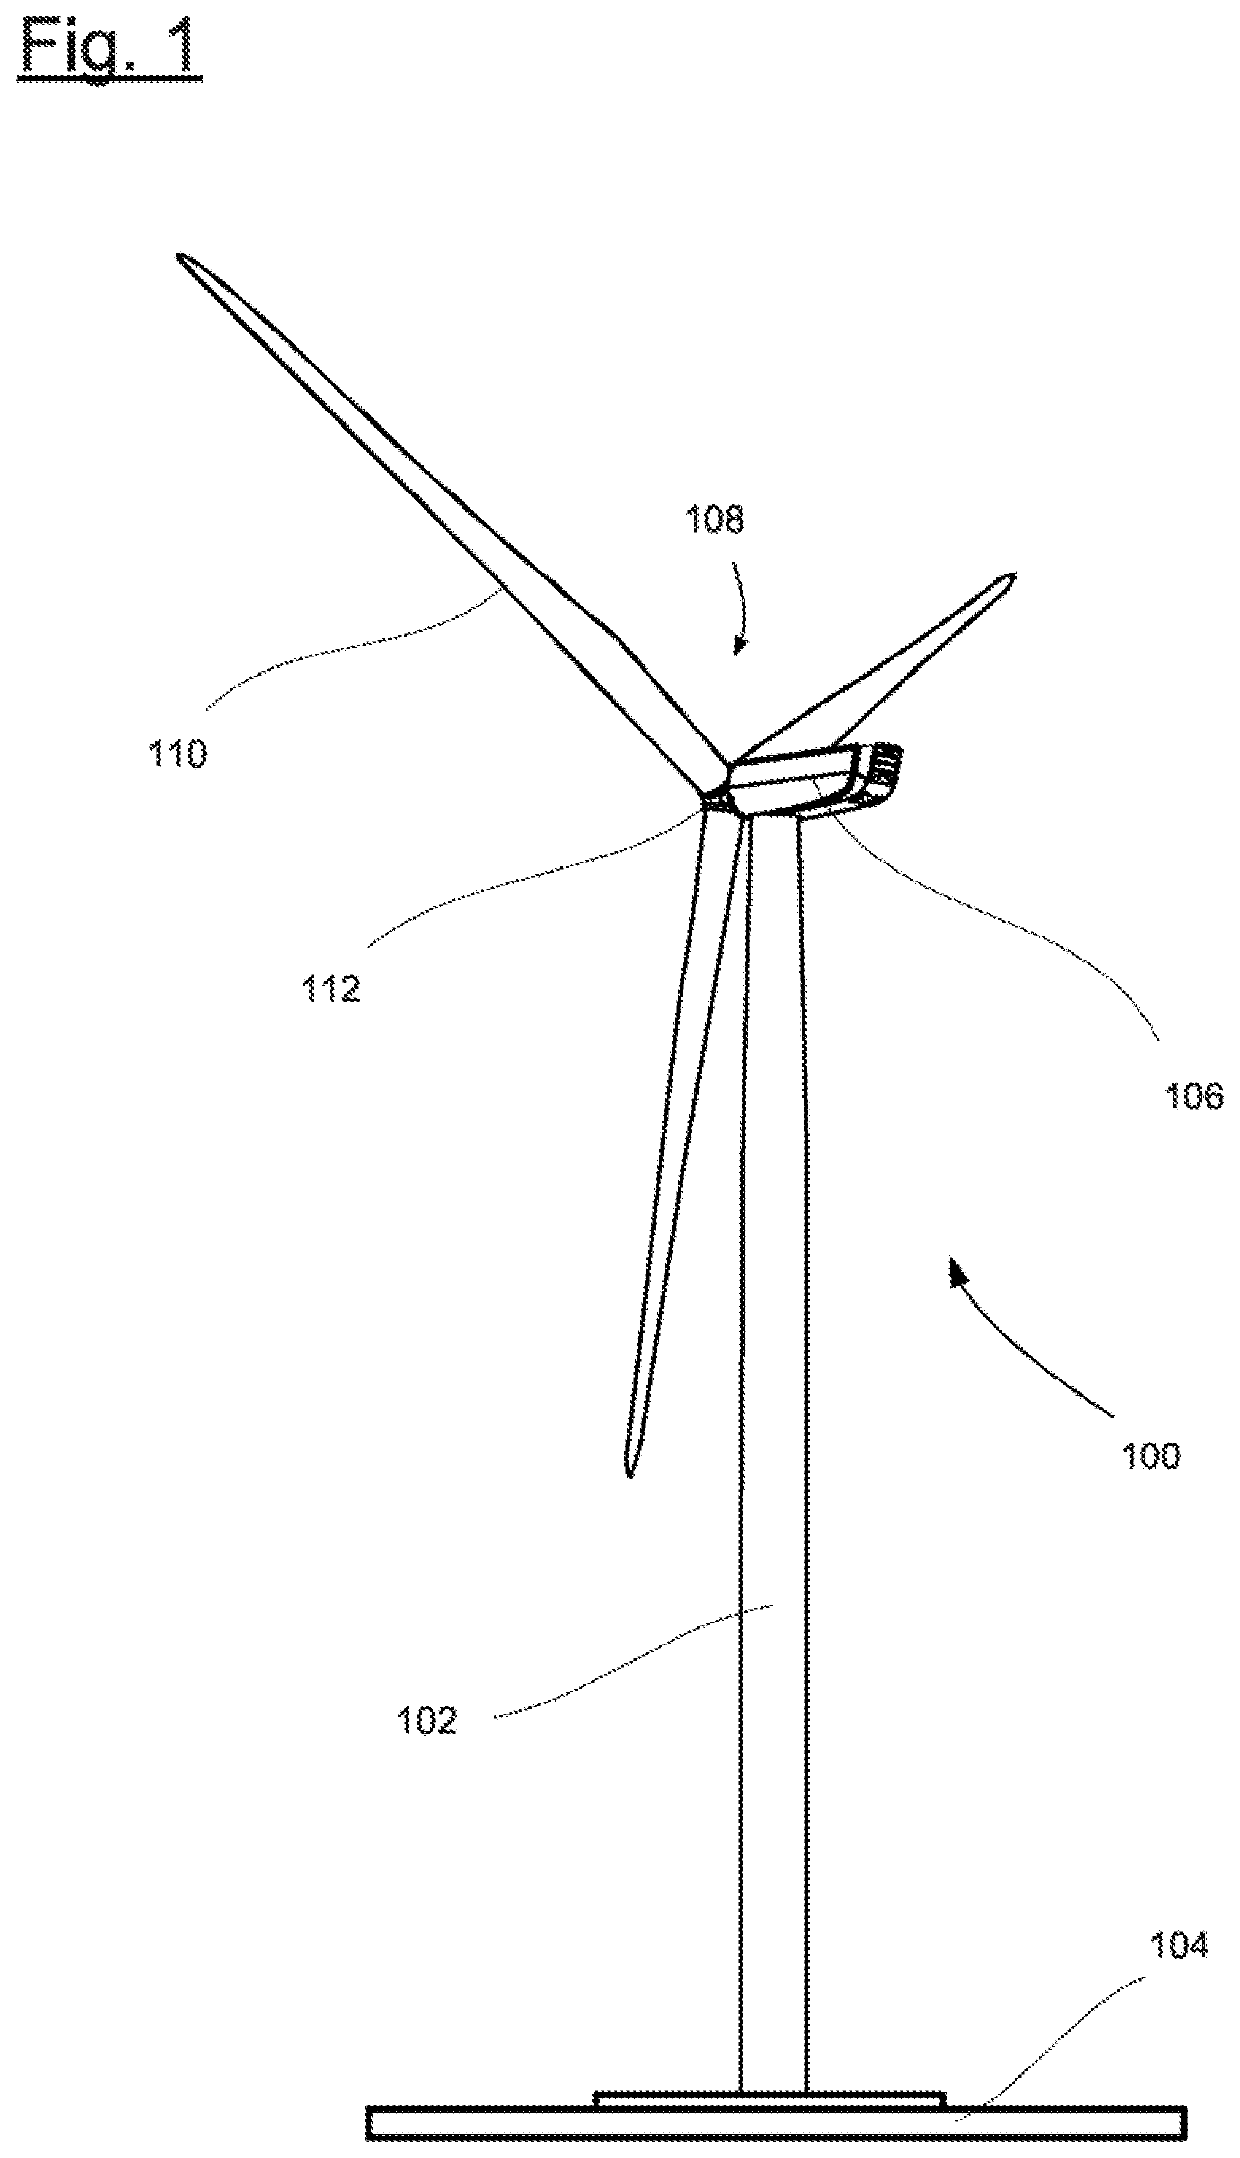 Rotor blade for a wind turbine and rotor blade tip